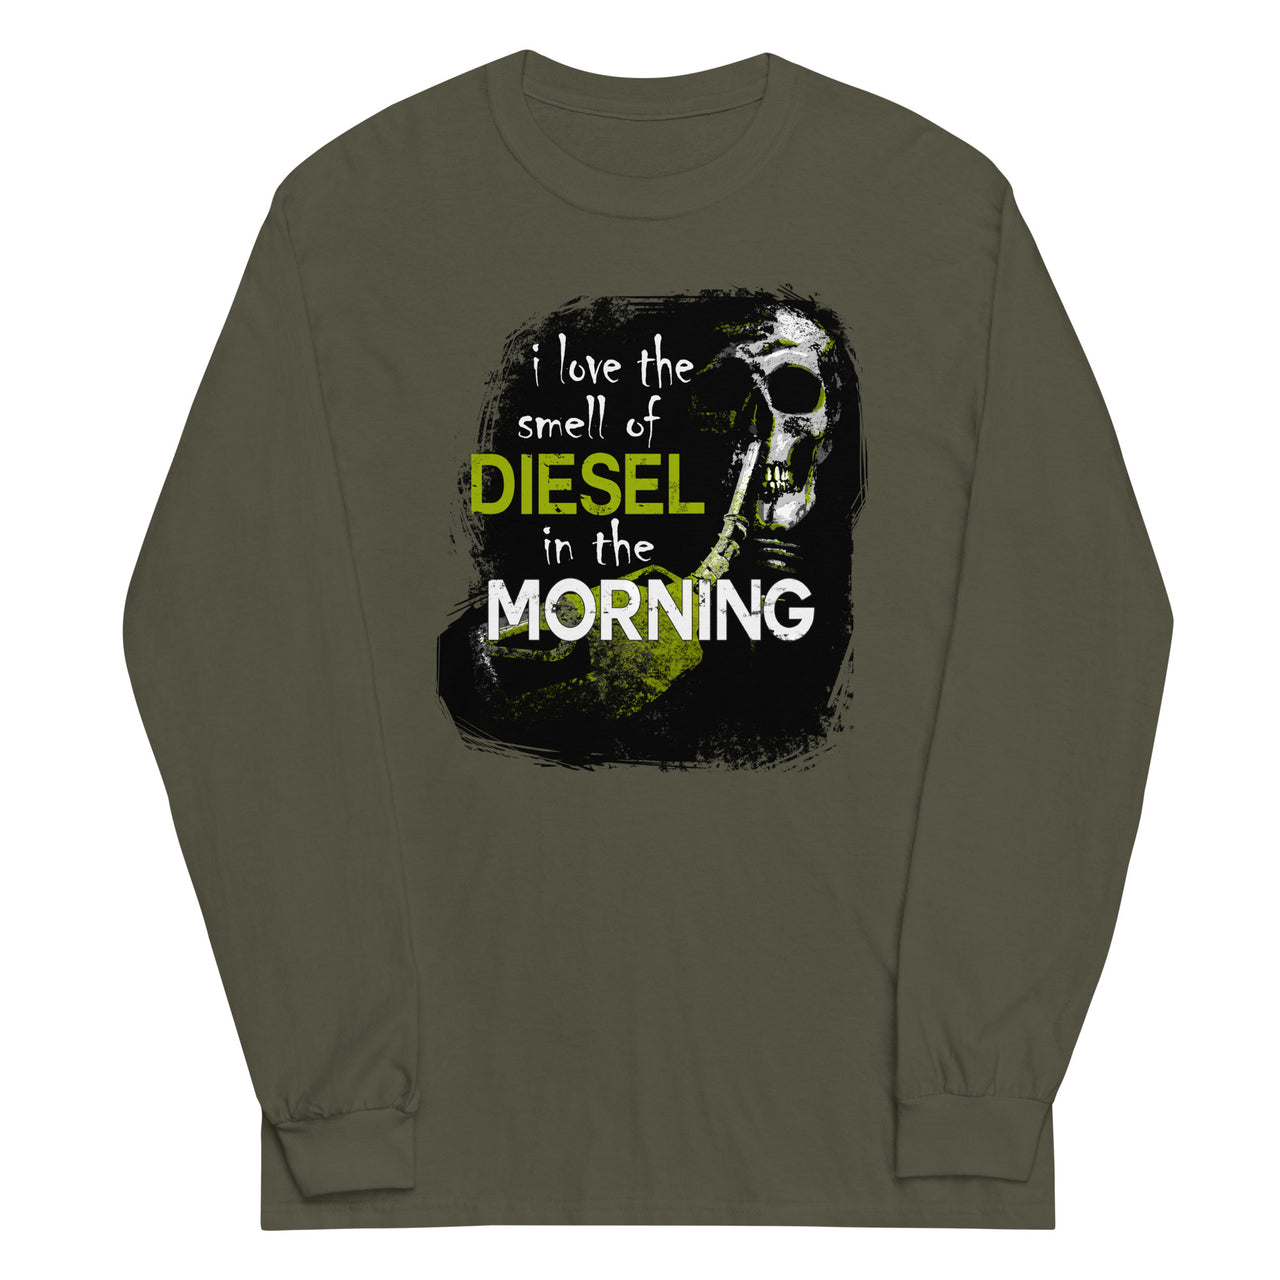 Truck Long Sleeve T-Shirt - I Love The Smell of Diesel In The Morning in military